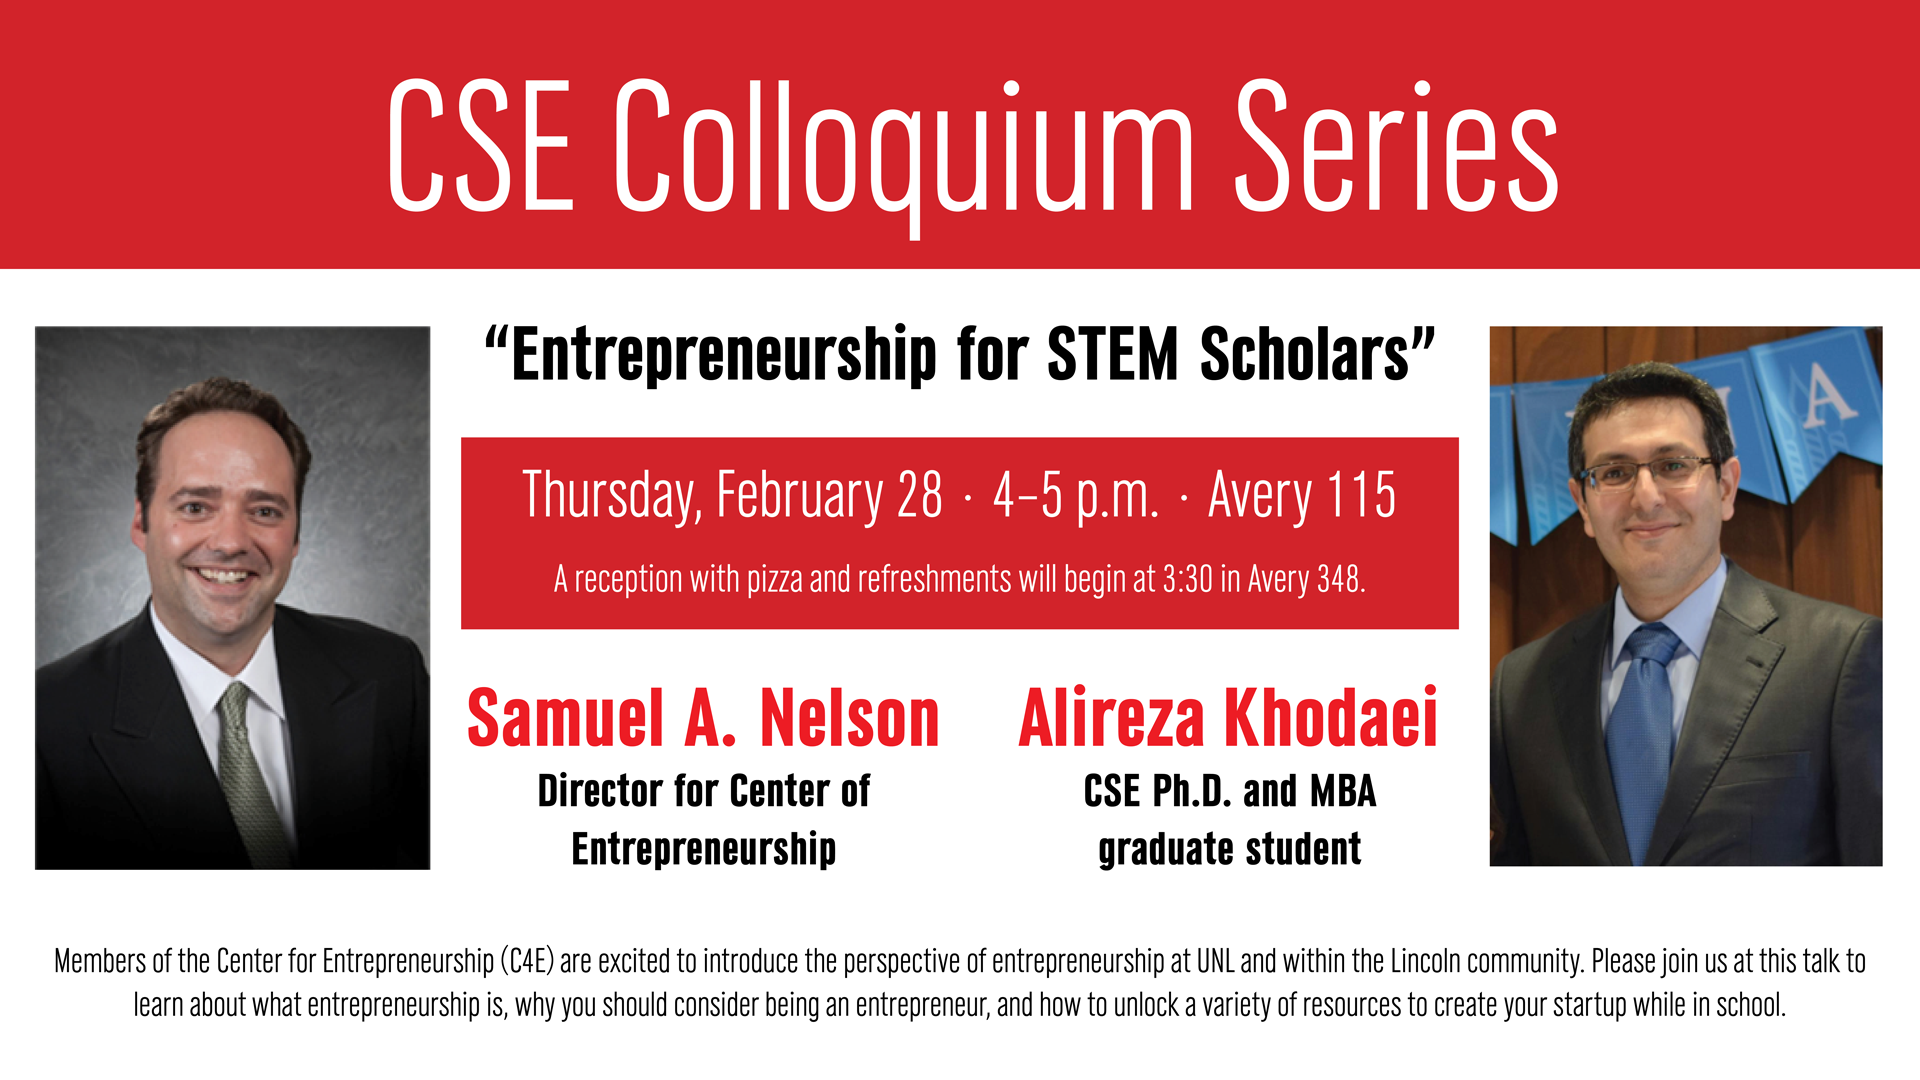 Samuel A. Nelson and Alireza Khodaei will give a special colloquium talk for CSE students about entrepreneurship on Feb. 28.